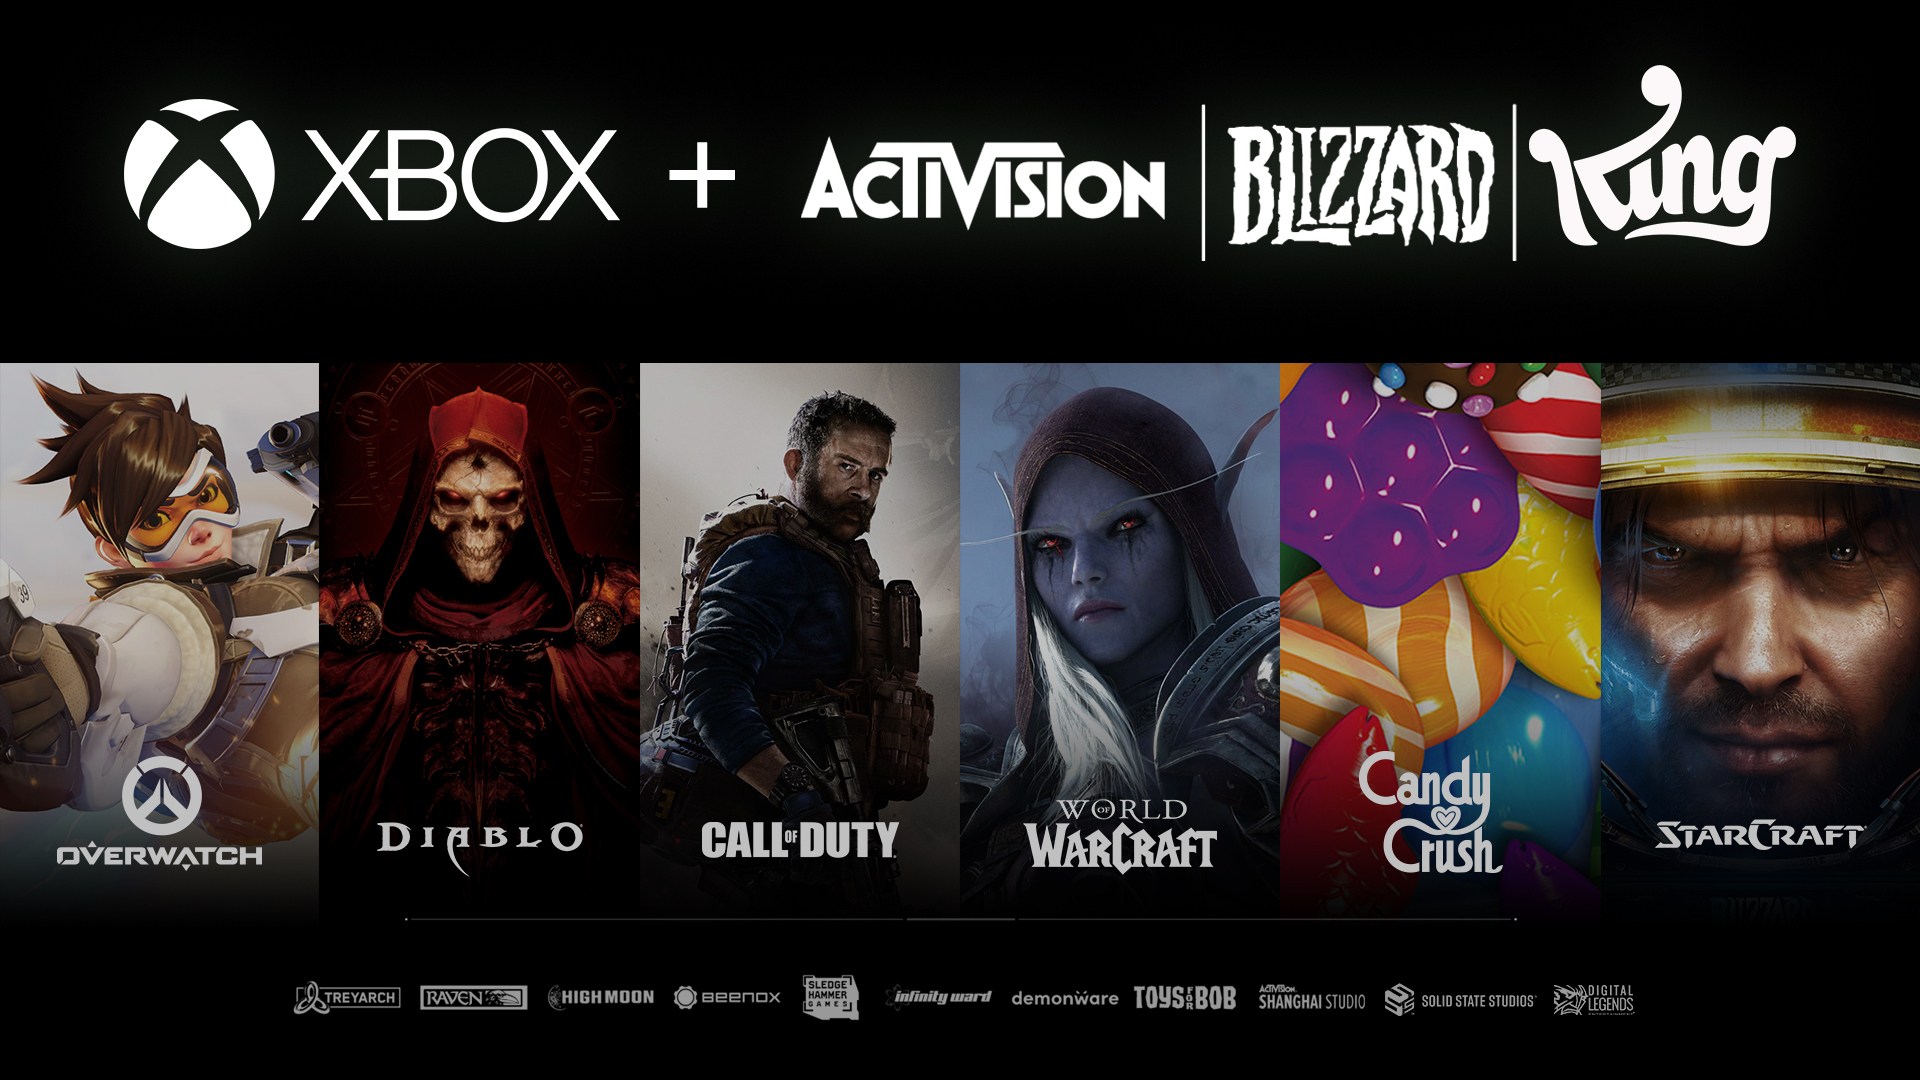 Xbox reaffirms CoD, Overwatch & Diablo coming to Game Pass amid Activision  investigation - Dexerto